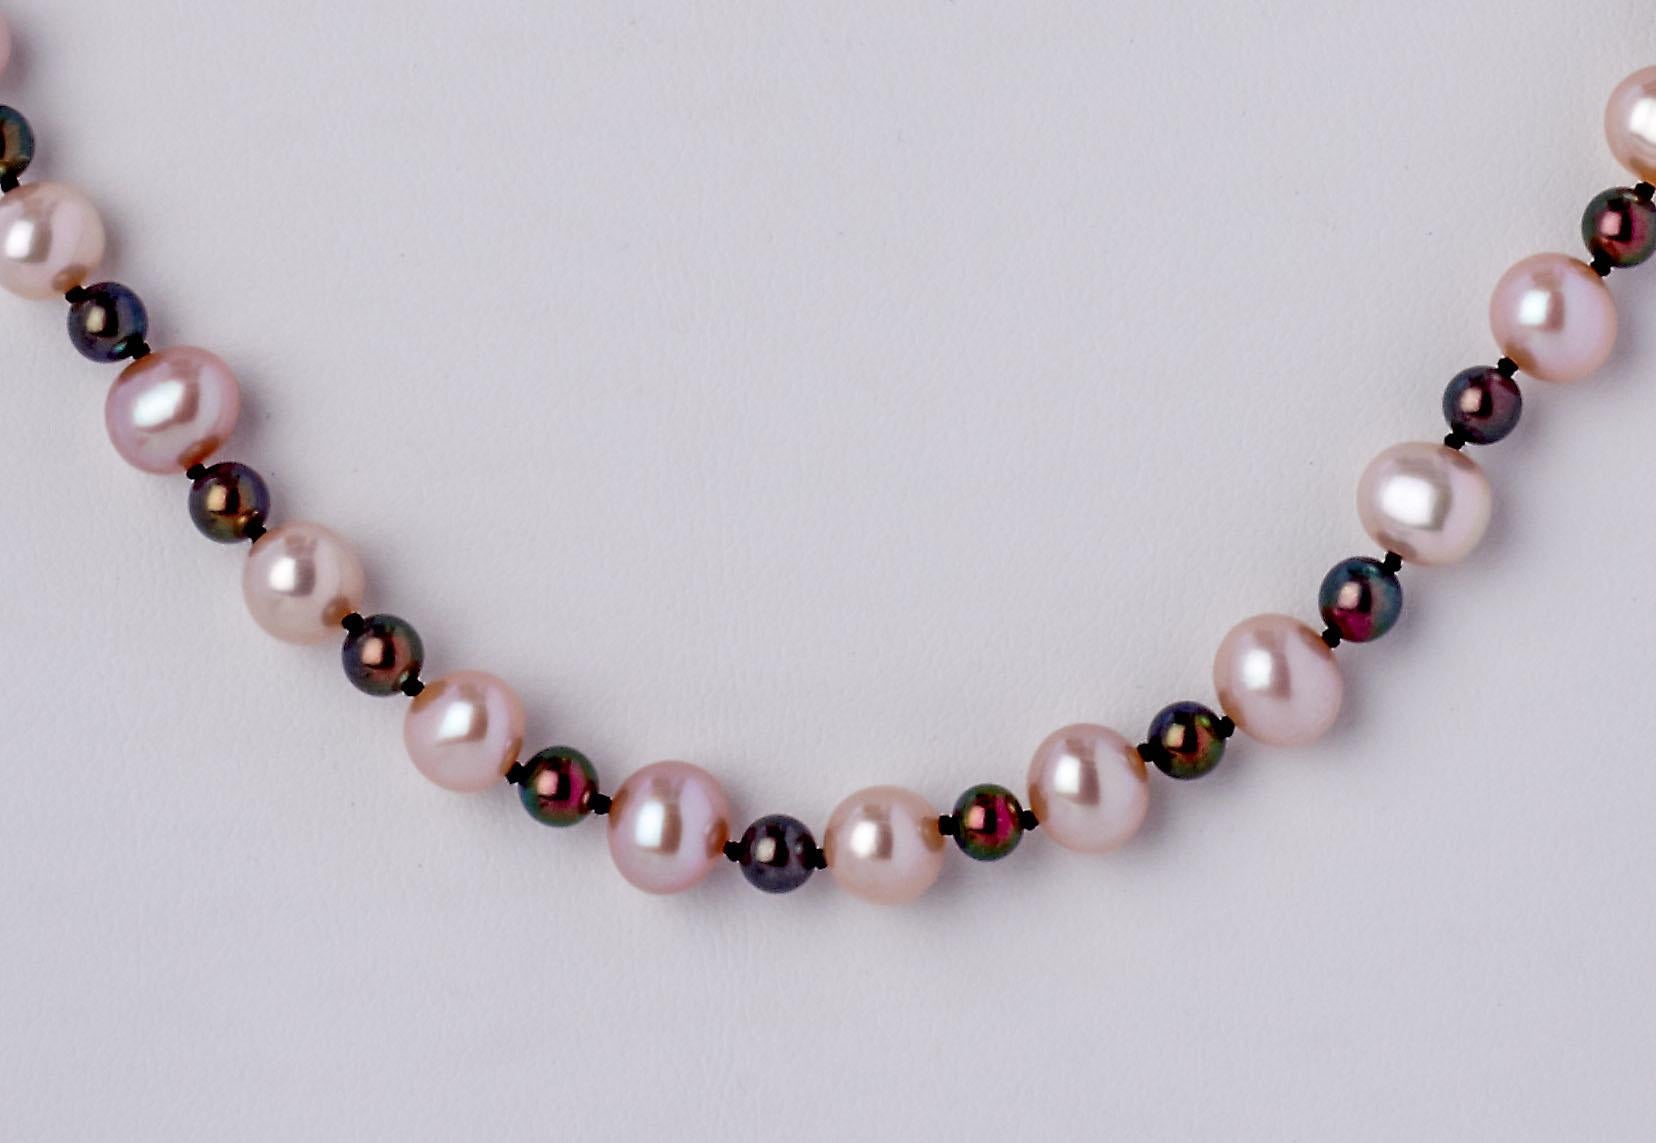 Soft shades of pink radiate from this pretty 24 inch pearl necklace, hand-strung with 7mm off round blush color freshwater pearls alternating with 4.25mm soft gray hematite beads. New, this piece is finished with a sterling silver & crystal clasp.